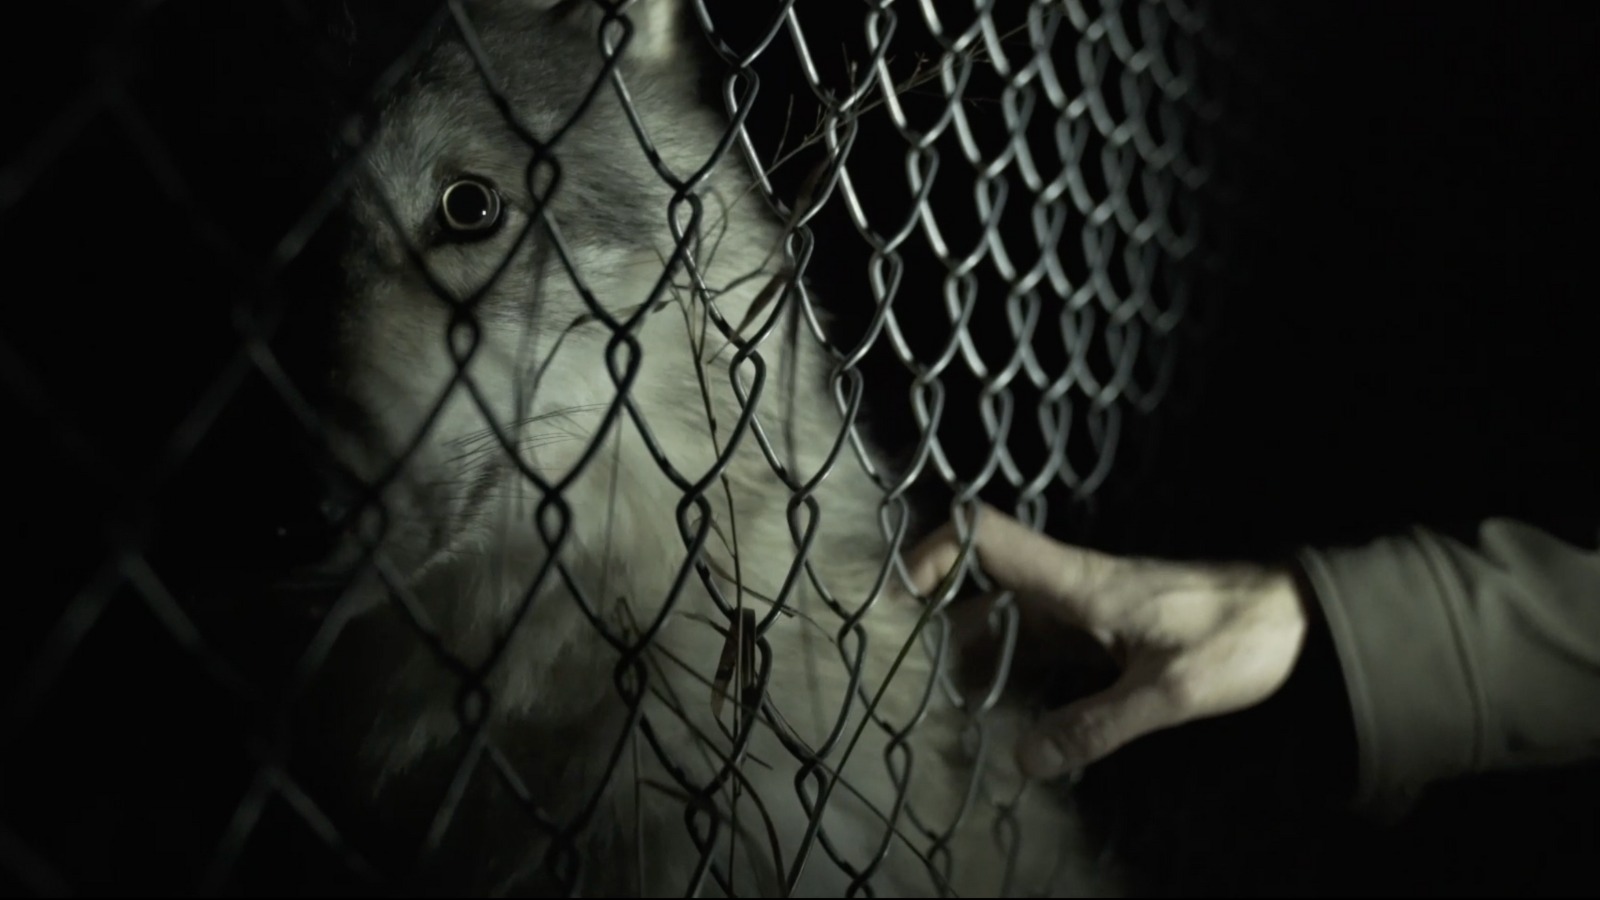 Still from Wolf Park, which shows a wolf behind a wire fence at night, with a hand reaching out to touch the wolf